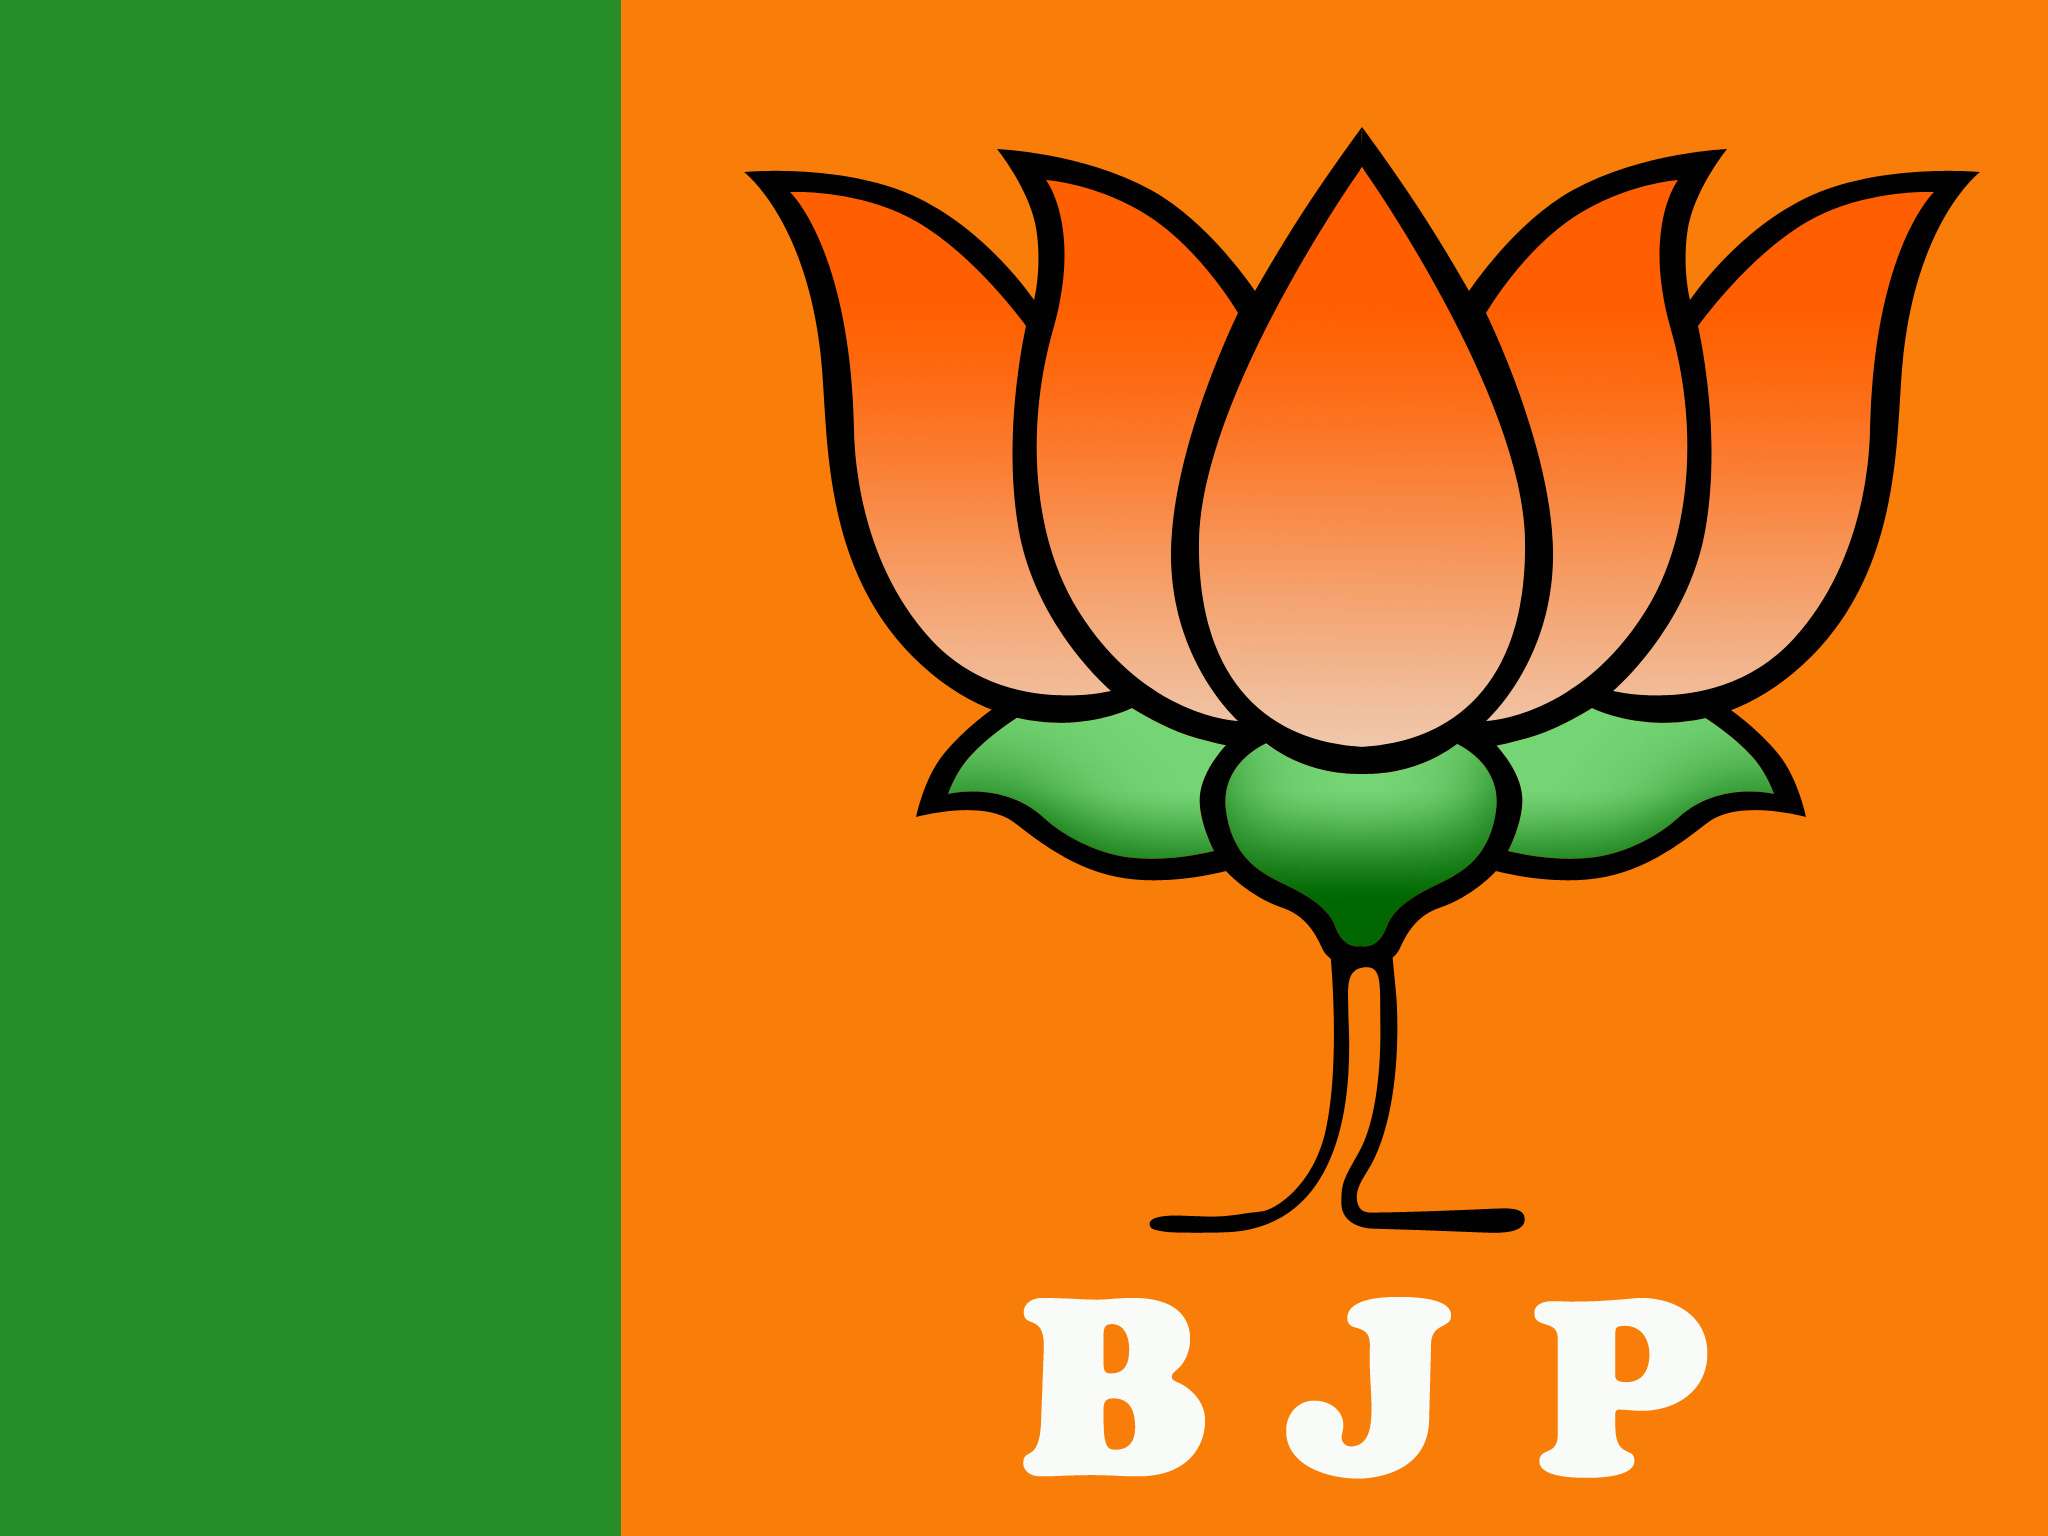 Army keeping Kashmir with India: BJP